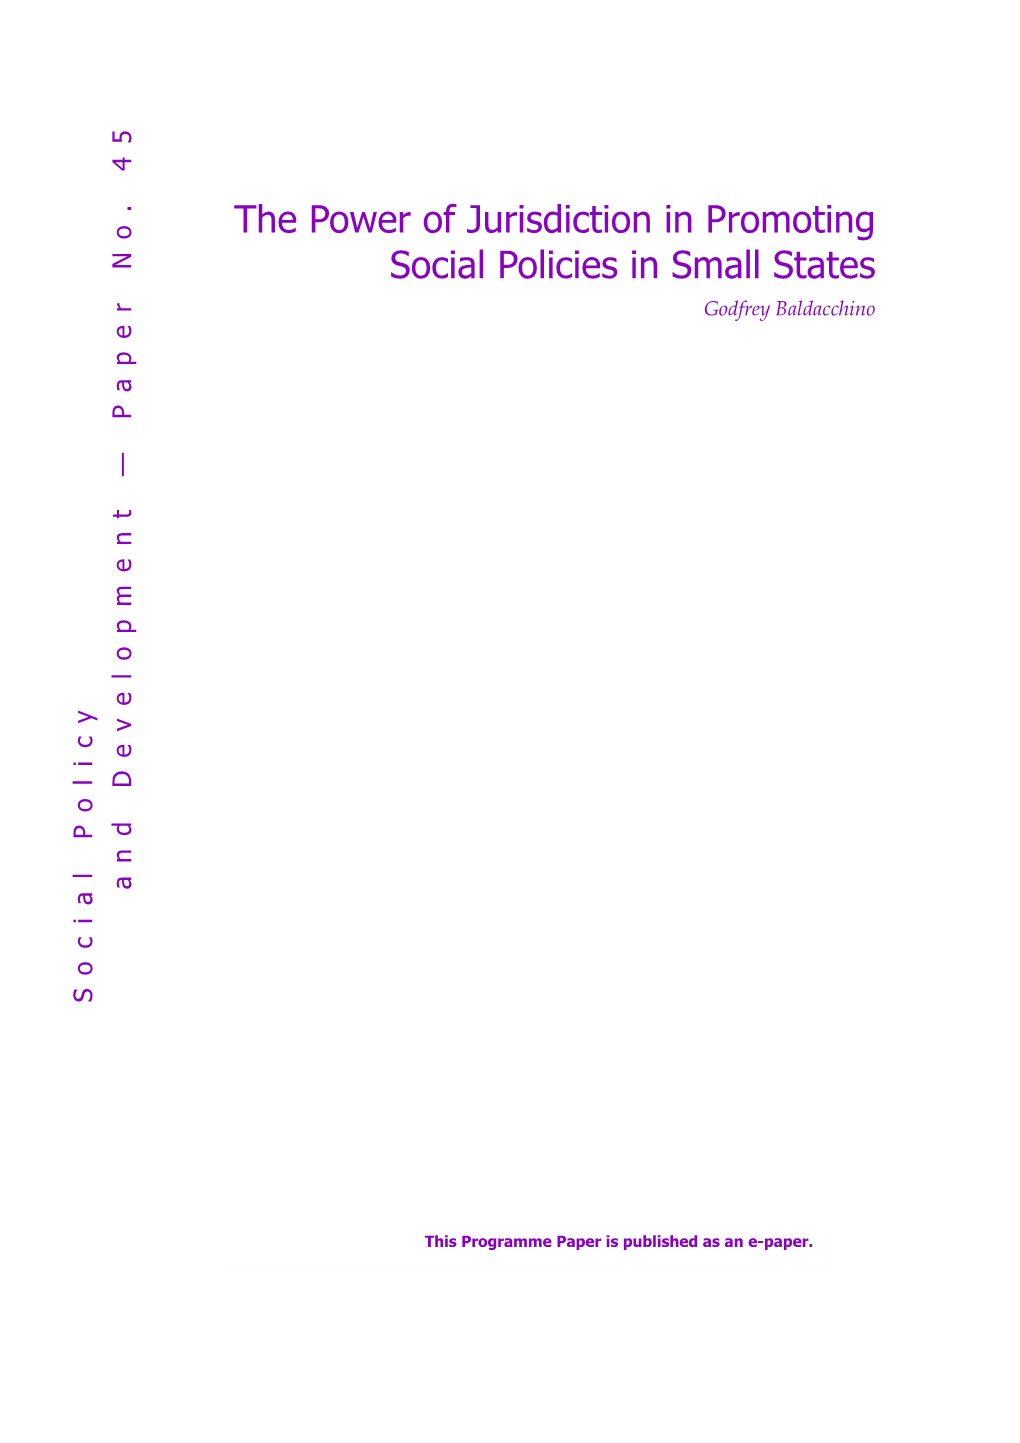 The Power of Jurisdiction in Promoting Social Policies in Small States